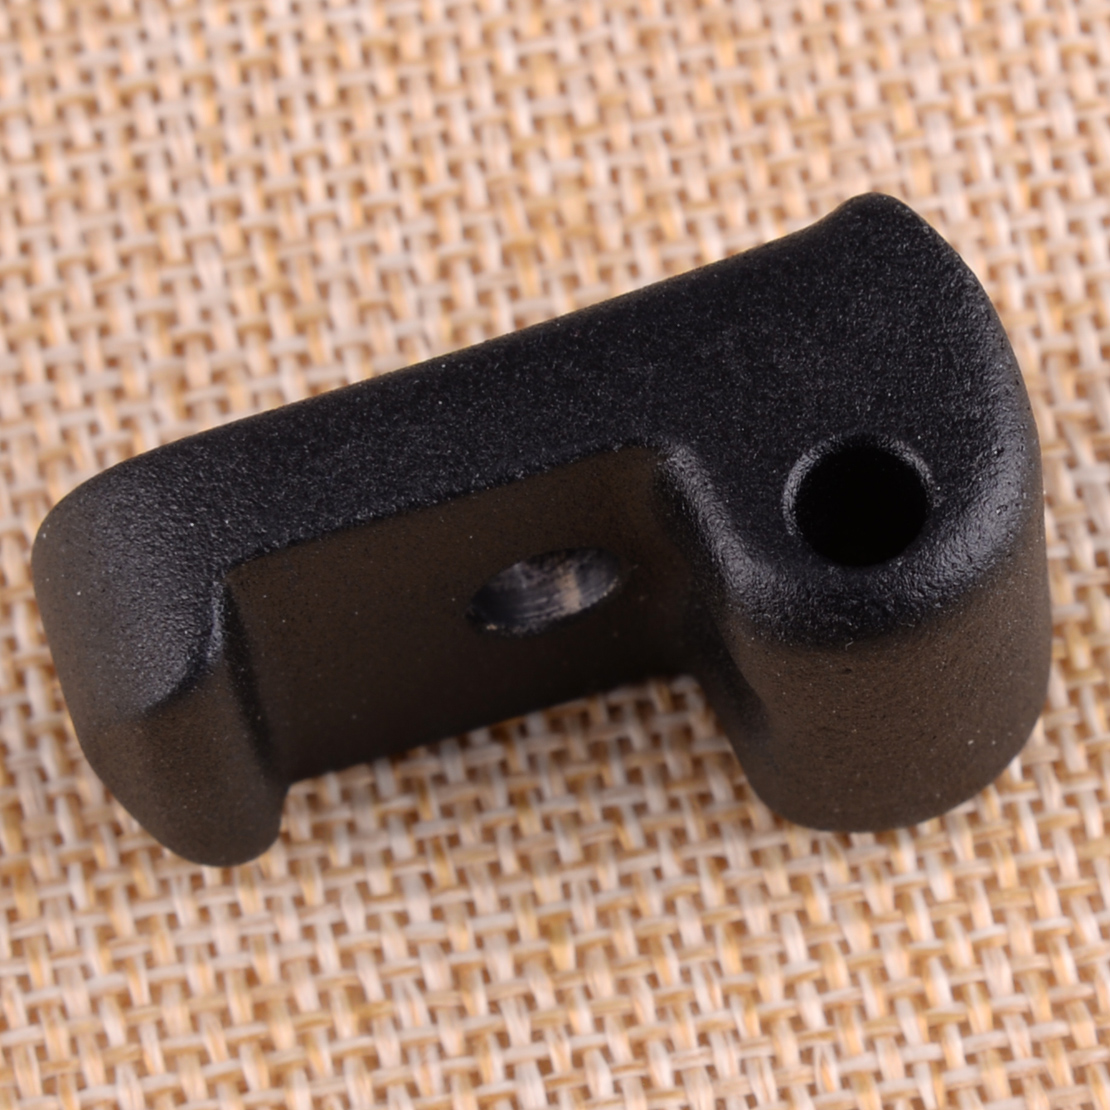 Lock Kick Scooter Latch Front Fit for Xiaomi MIJIA M365 Modification Tools Use 